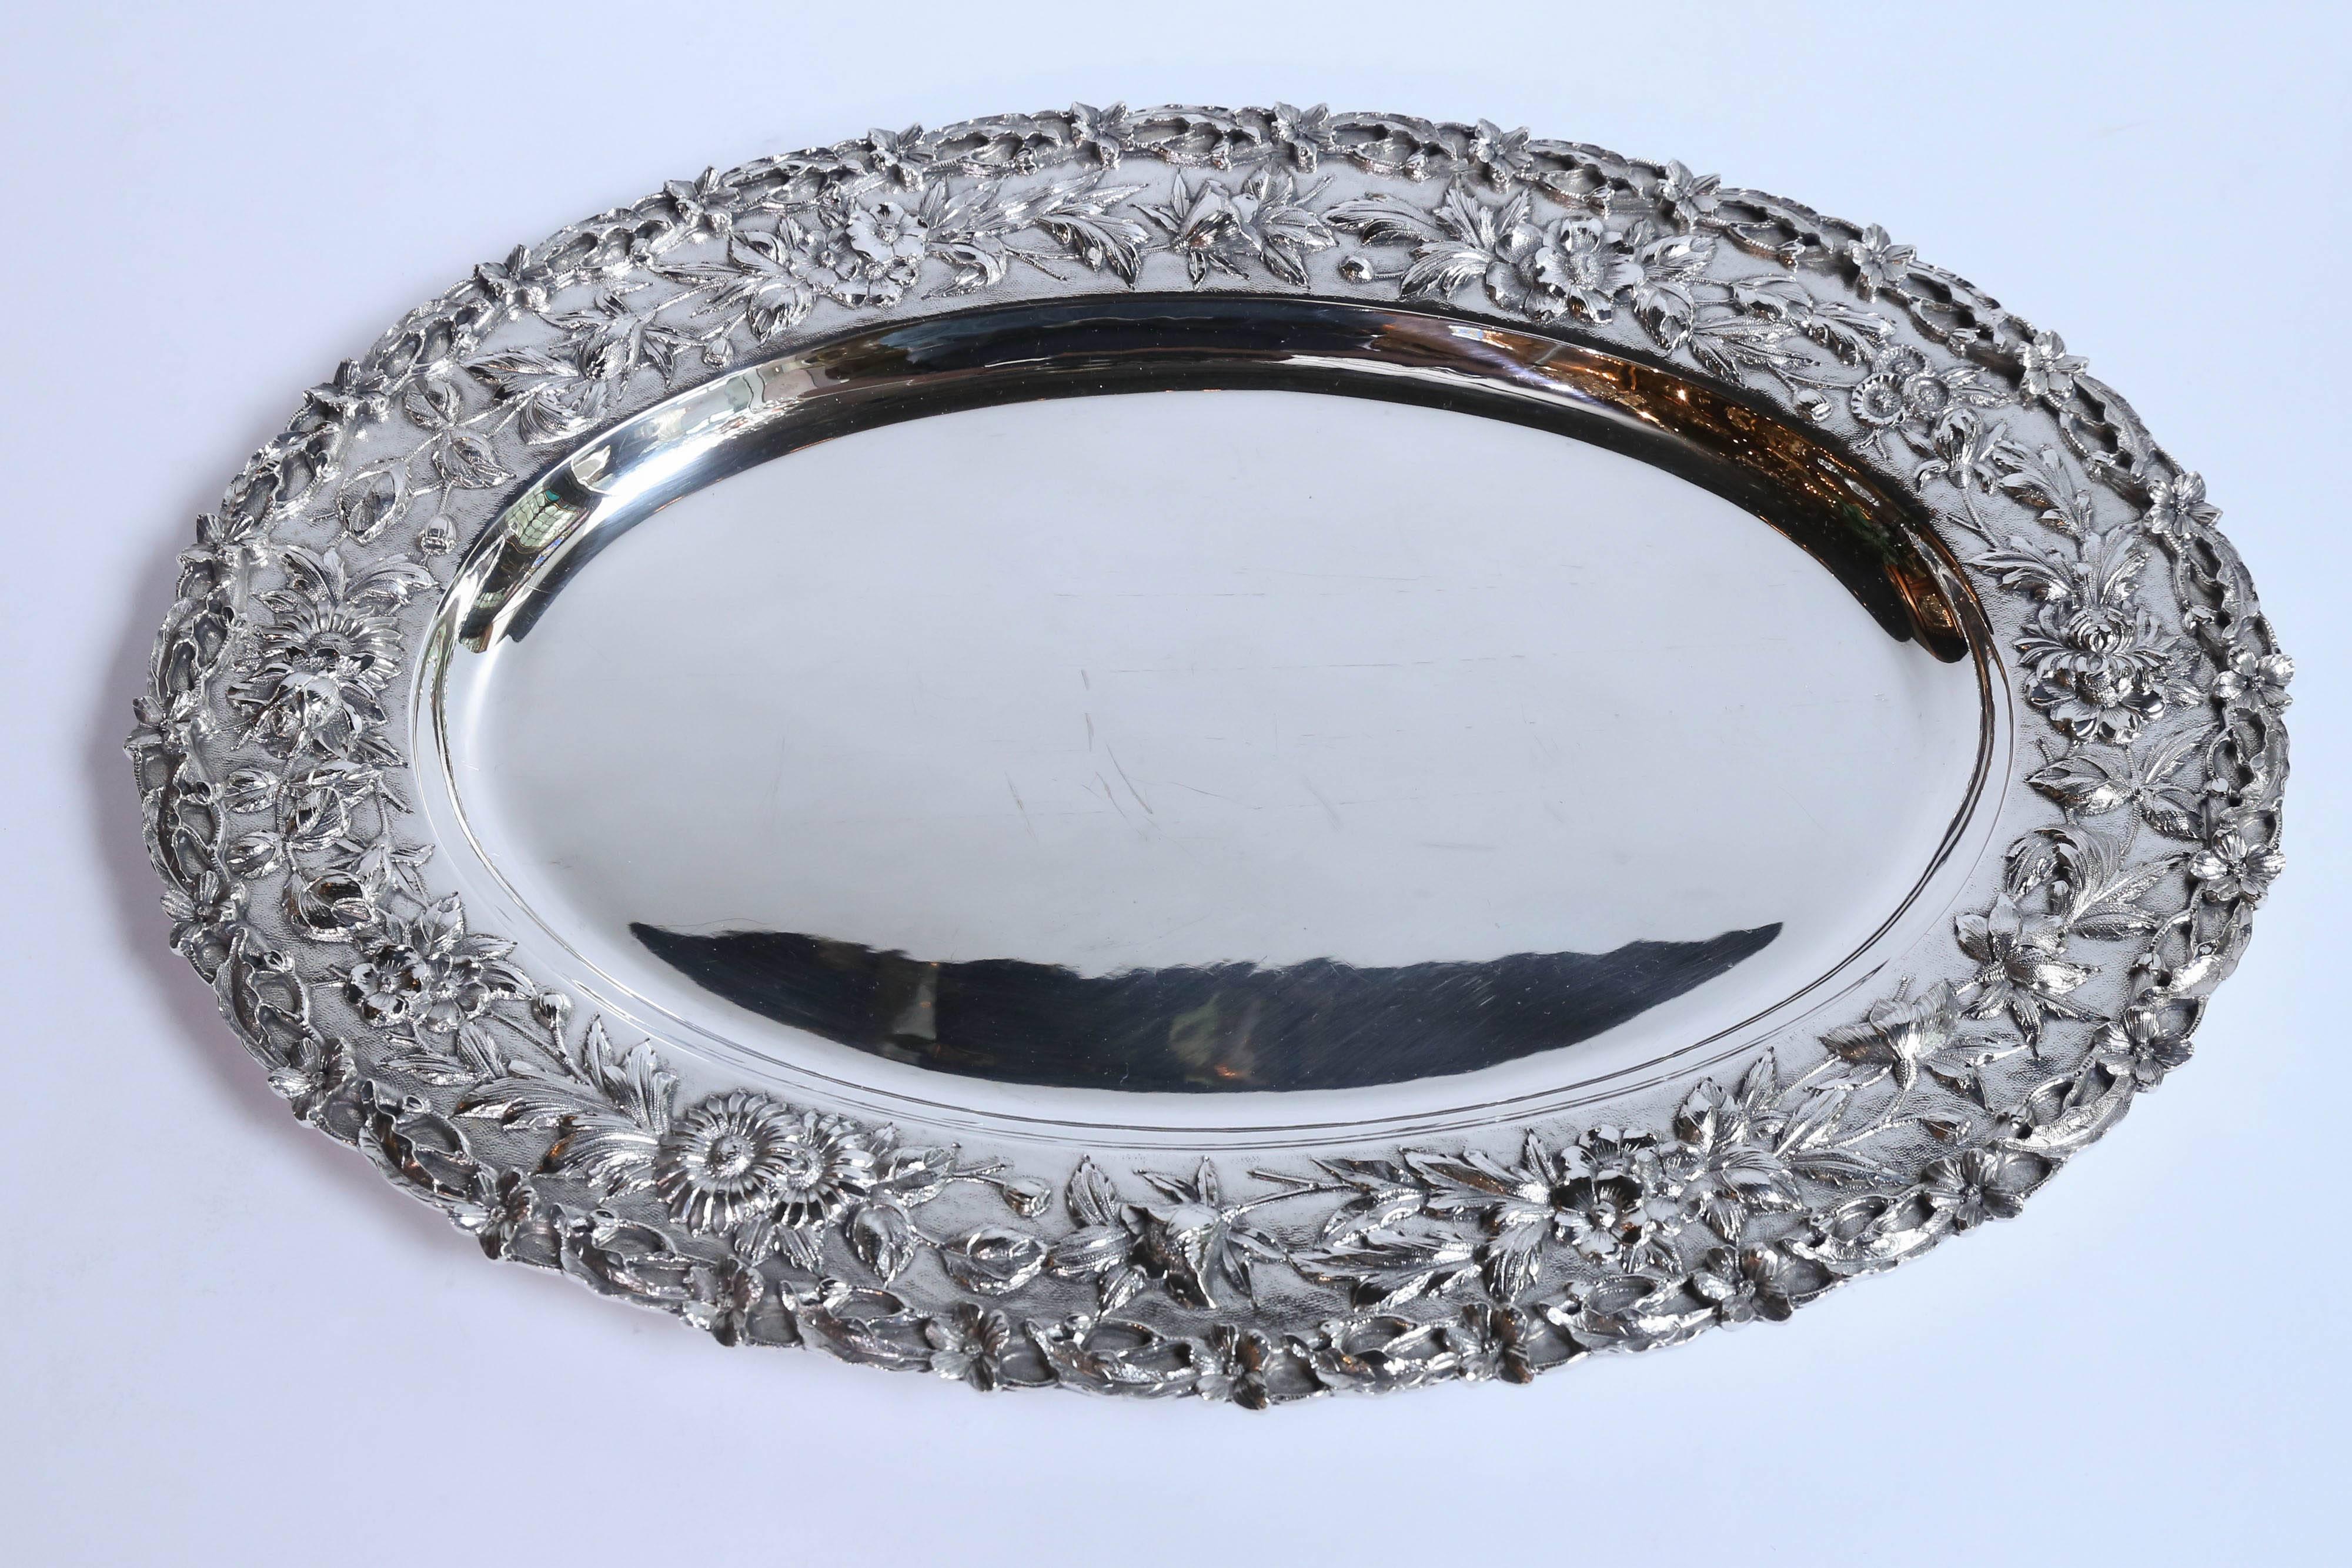 Lovely tray with floral border made of sterling silver.